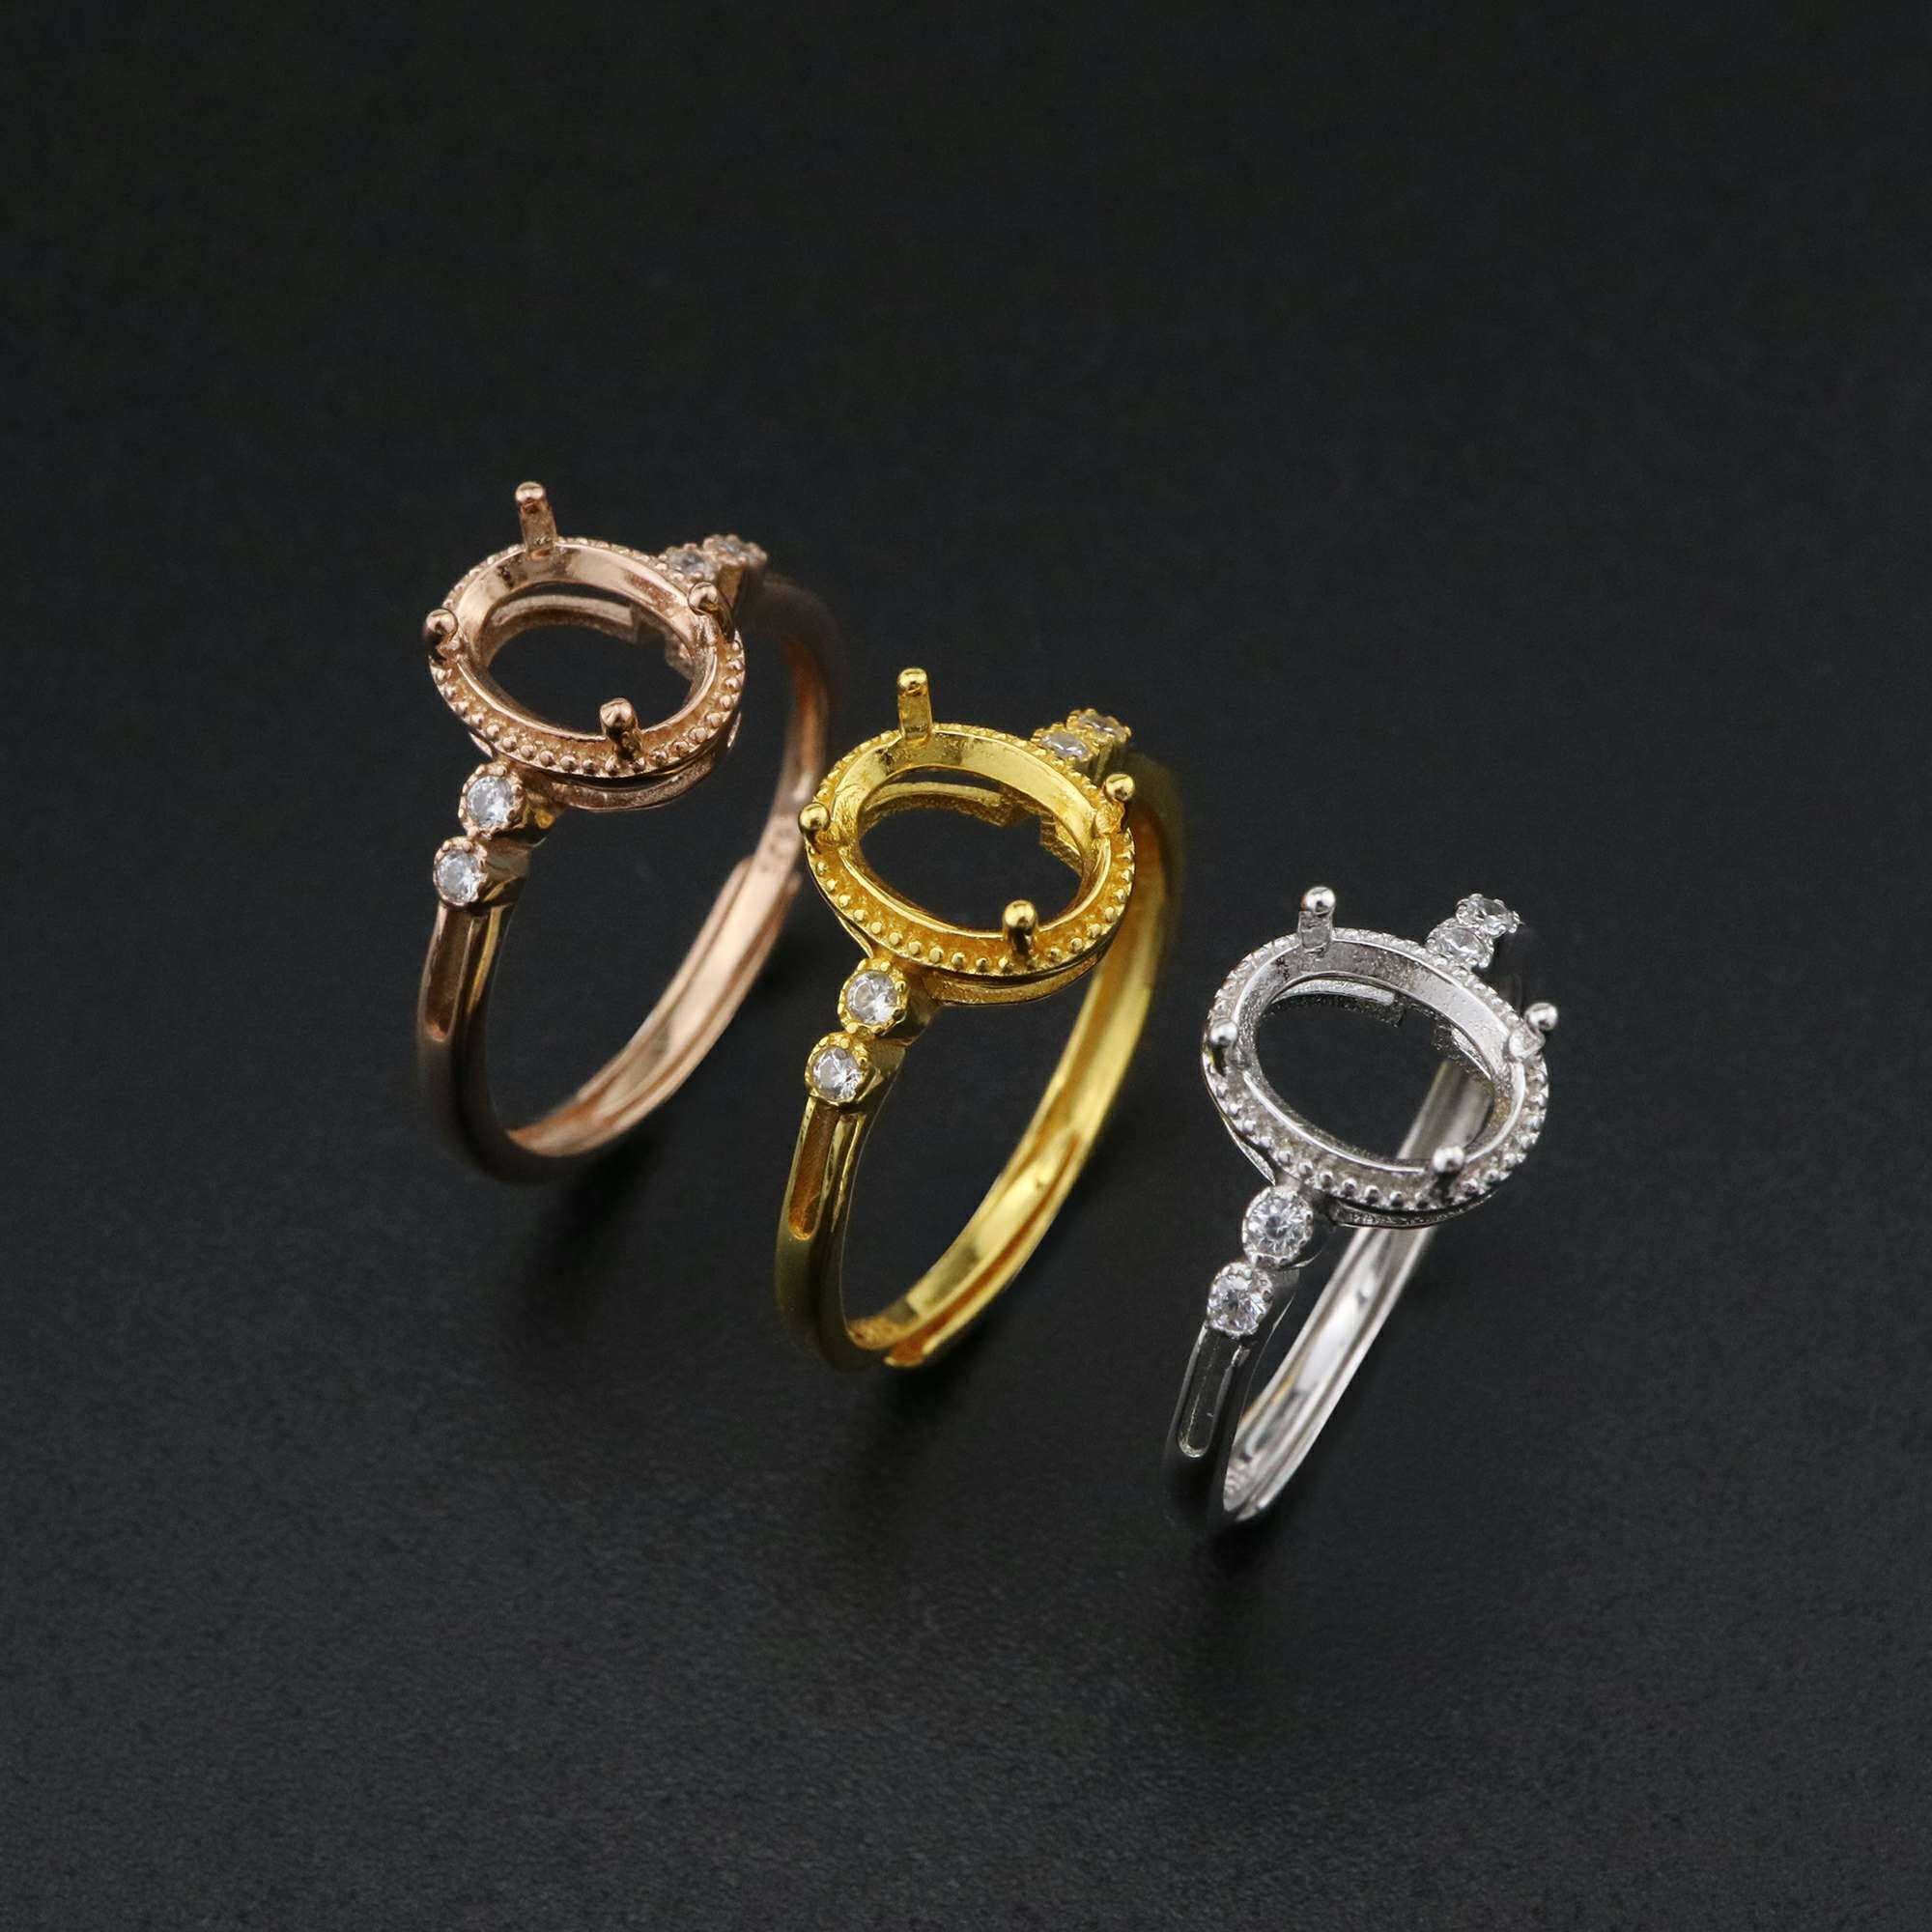 1Pcs 6x8MM Oval Prong Ring Settings Adjustable Vinatge Style Gold Plated Solid 925 Sterling Silver Bezel Tray for Gemstone 1224049 - Click Image to Close